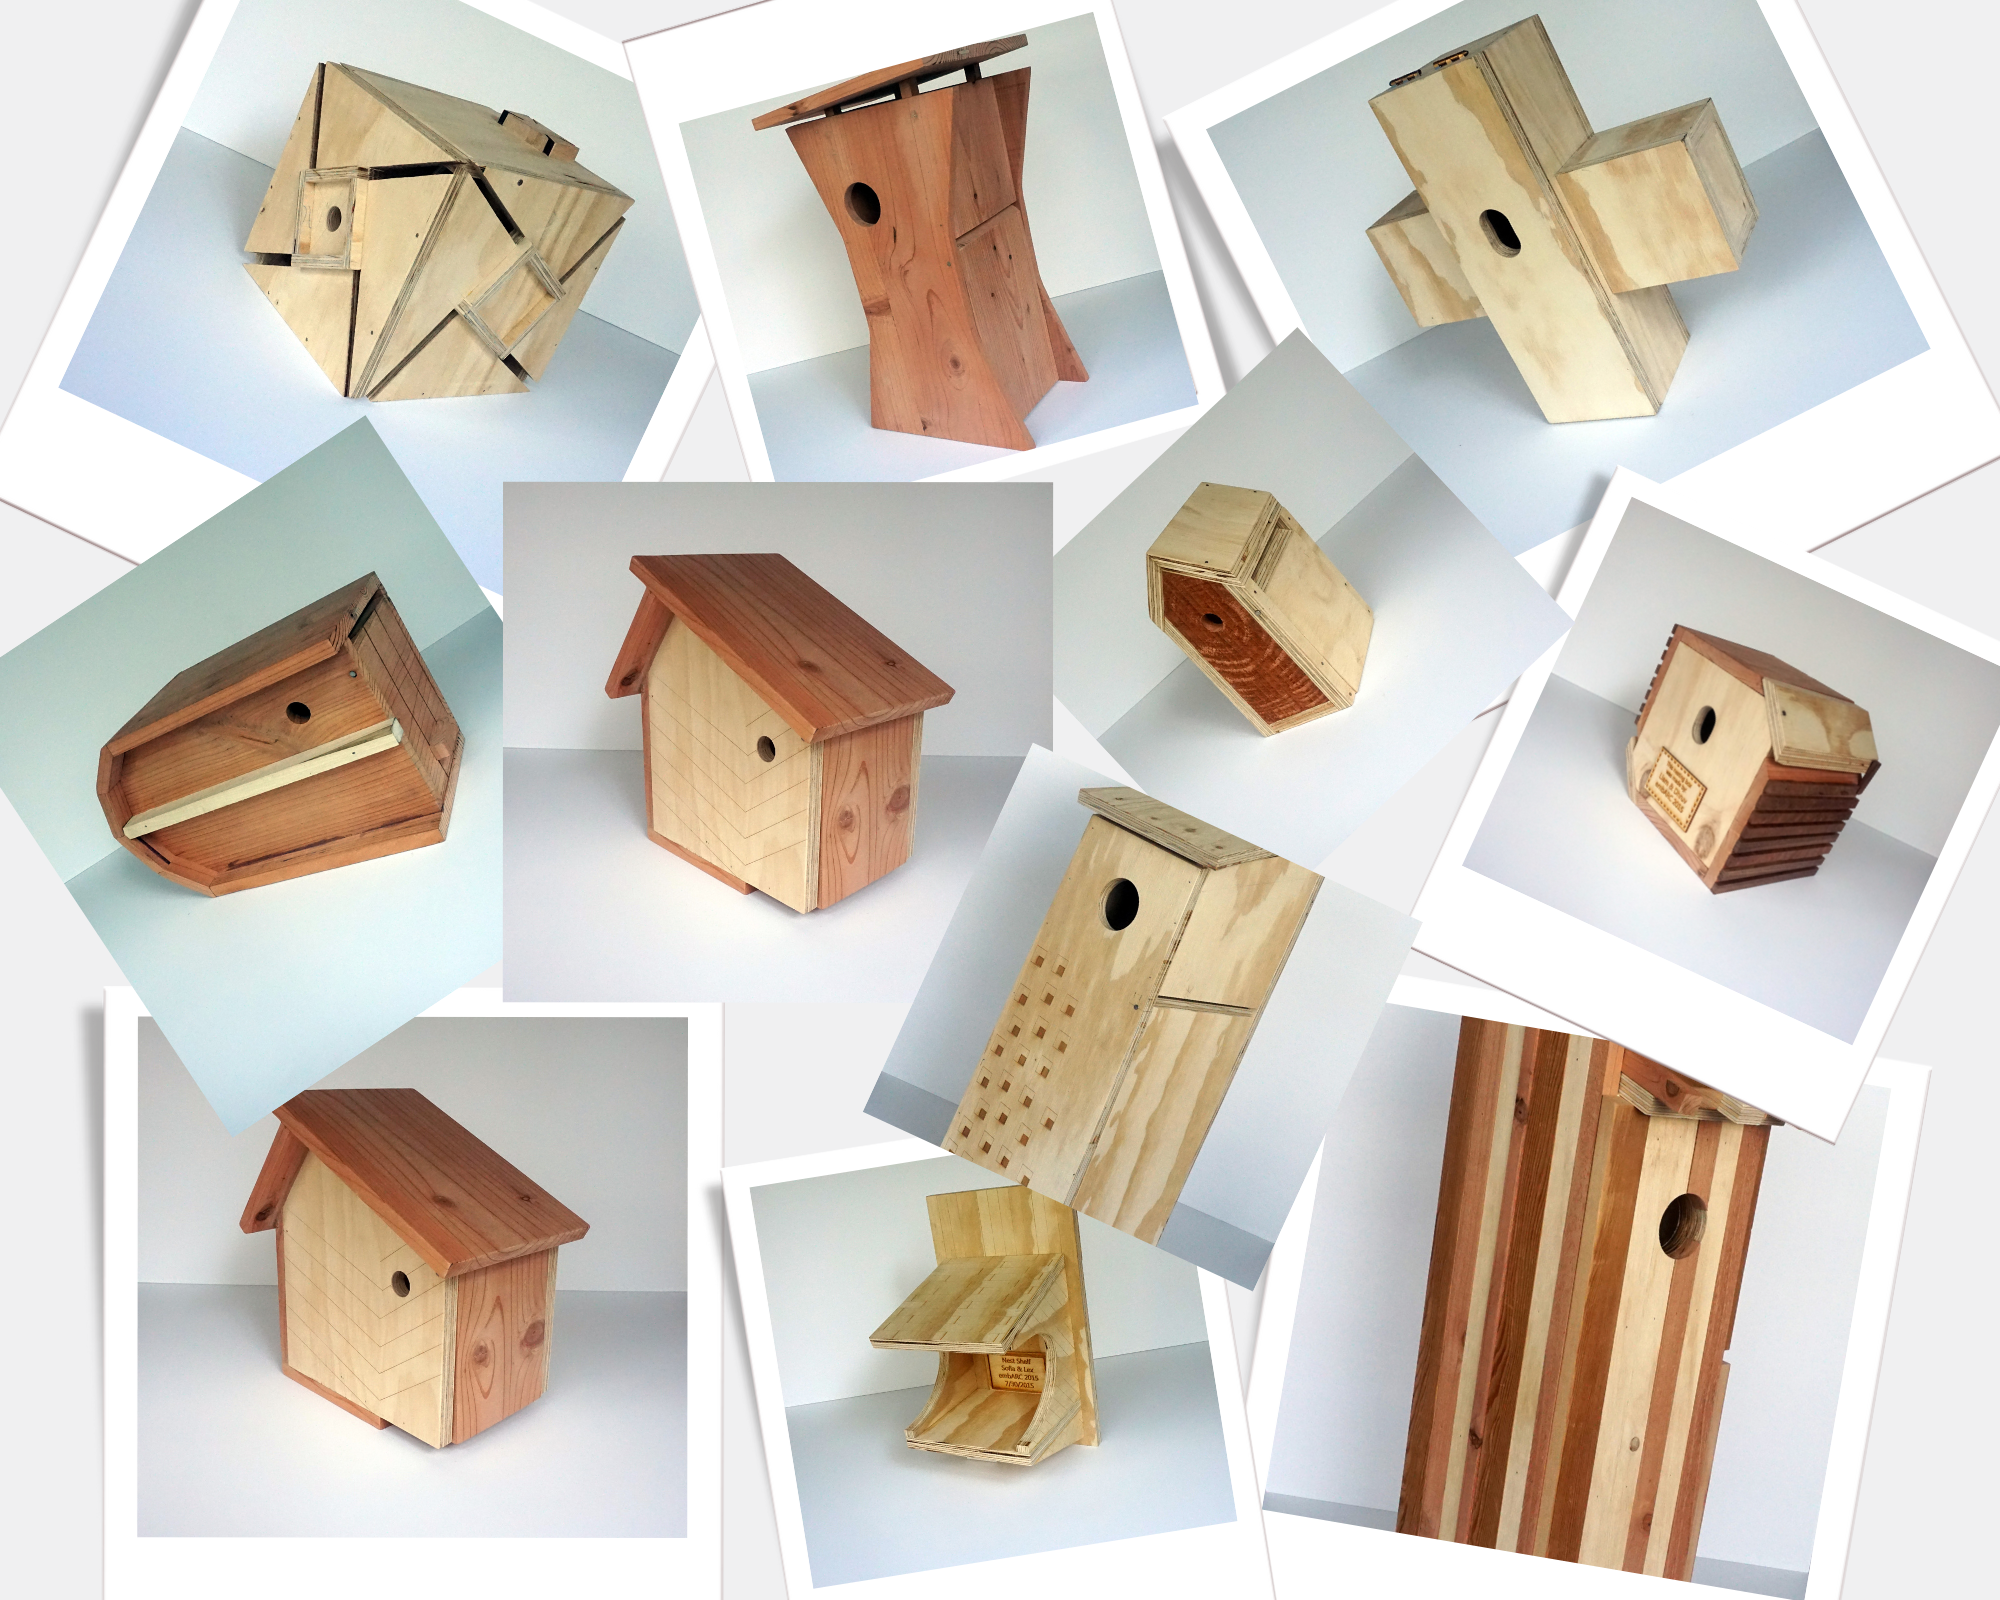 embarc students built bird houses for endangered species